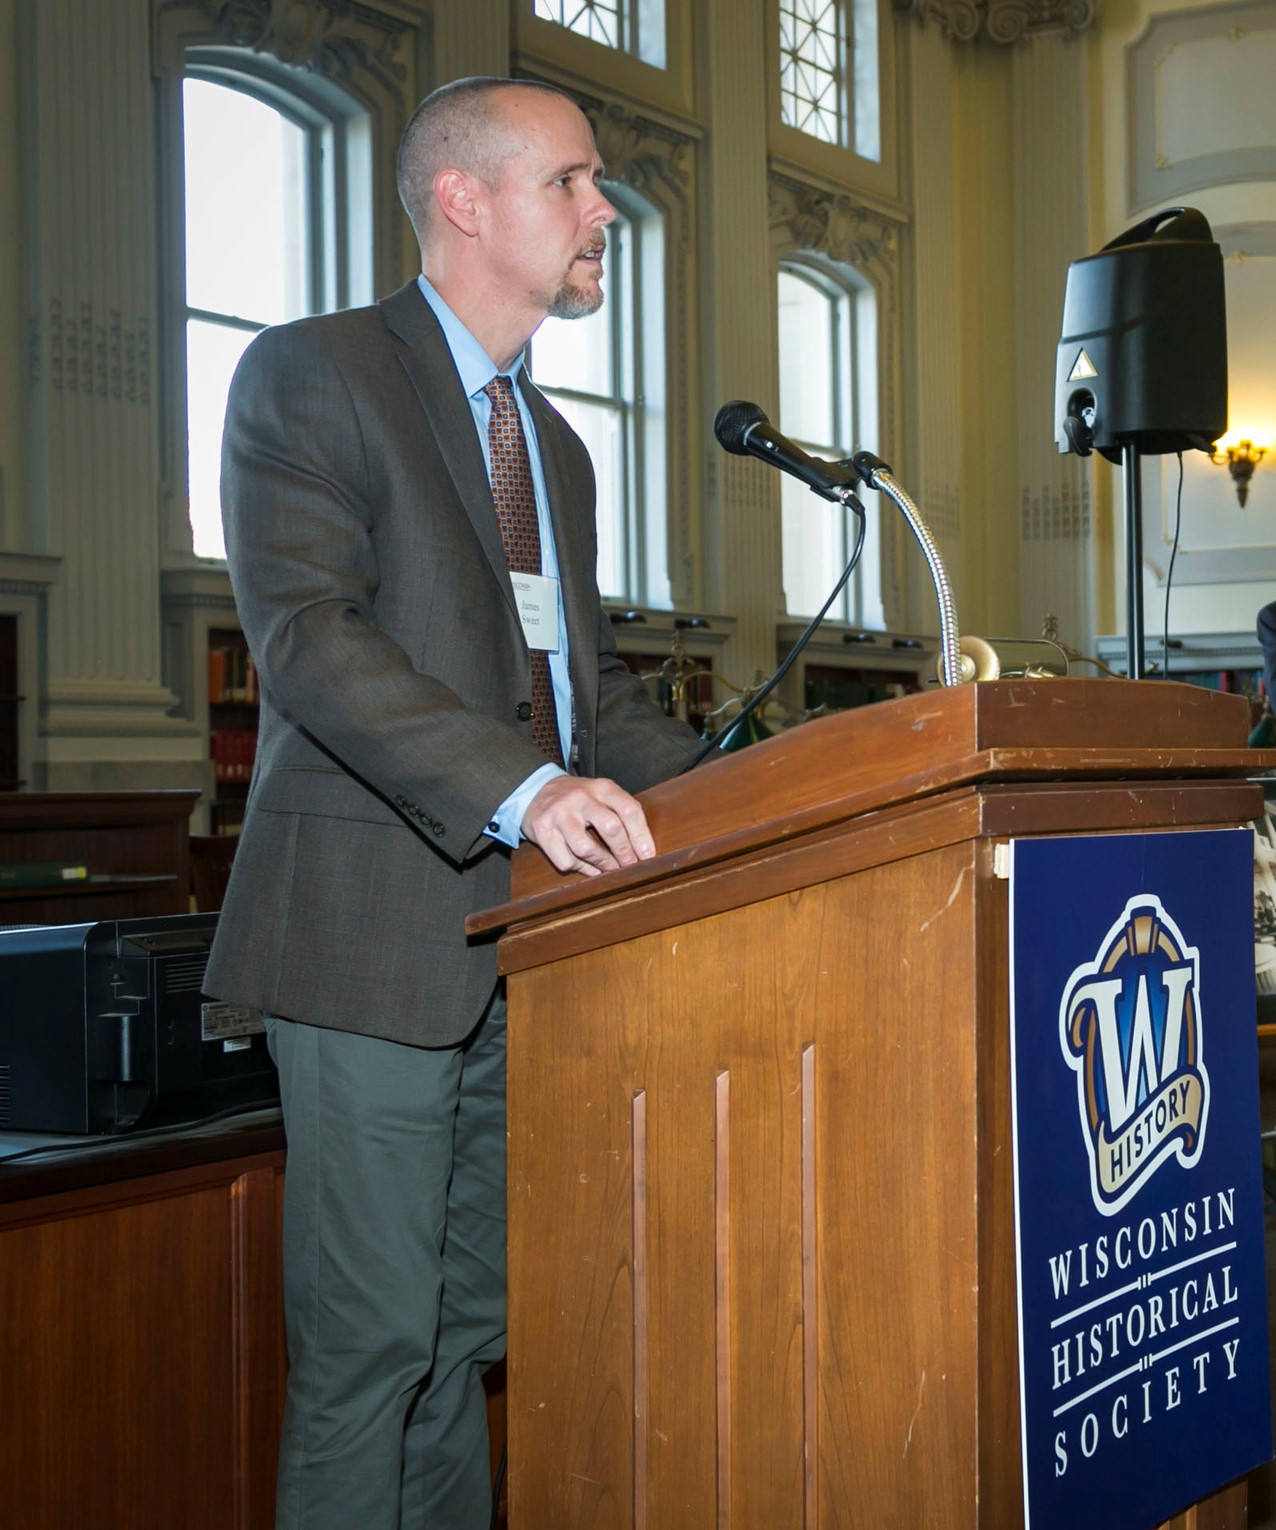 James H. Sweet stands at a lectern with the Wisconsin Historical Society logo on the front in a grey suit, blue button down, and a tie with red and orange squares.